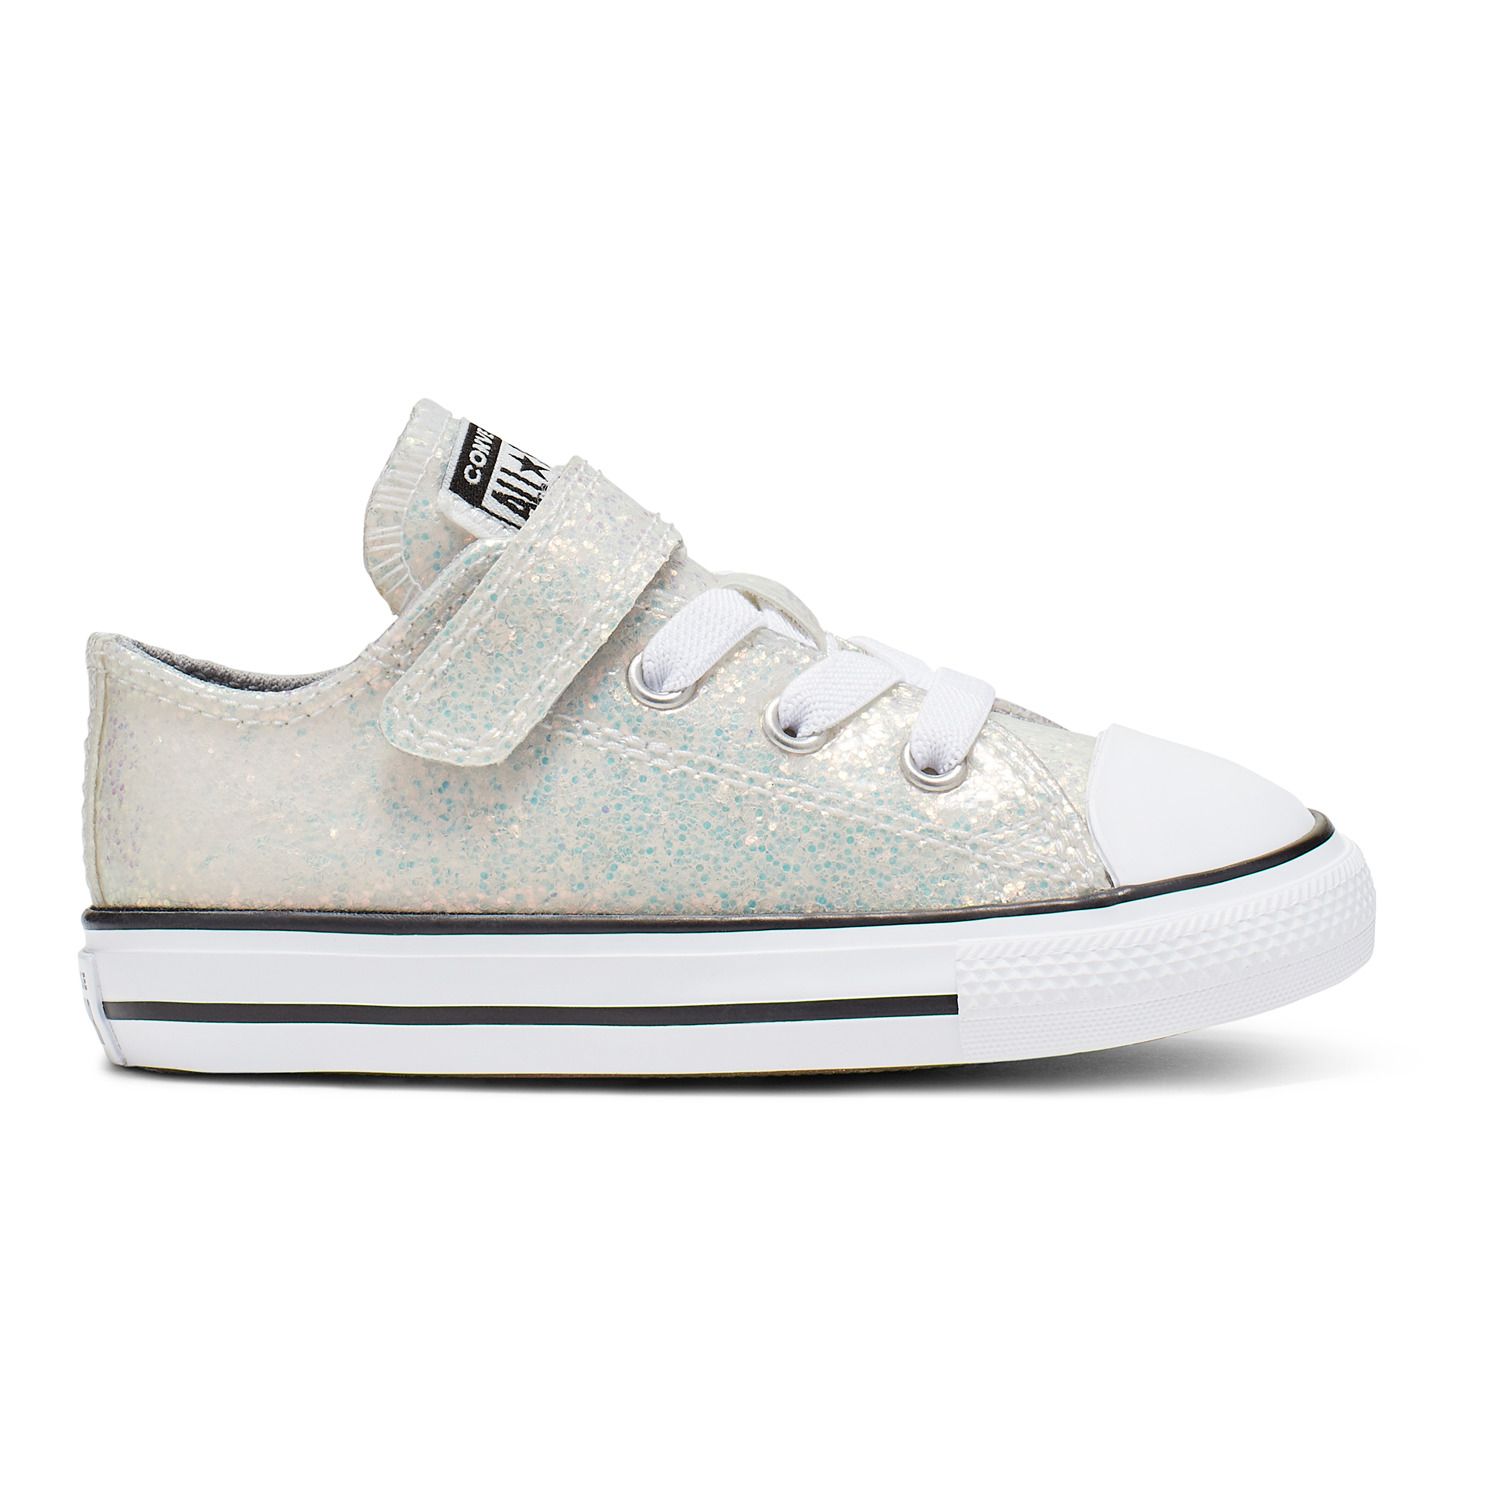 Toddler Girls' Converse Chuck Taylor All Star Coated Glitter Sneakers